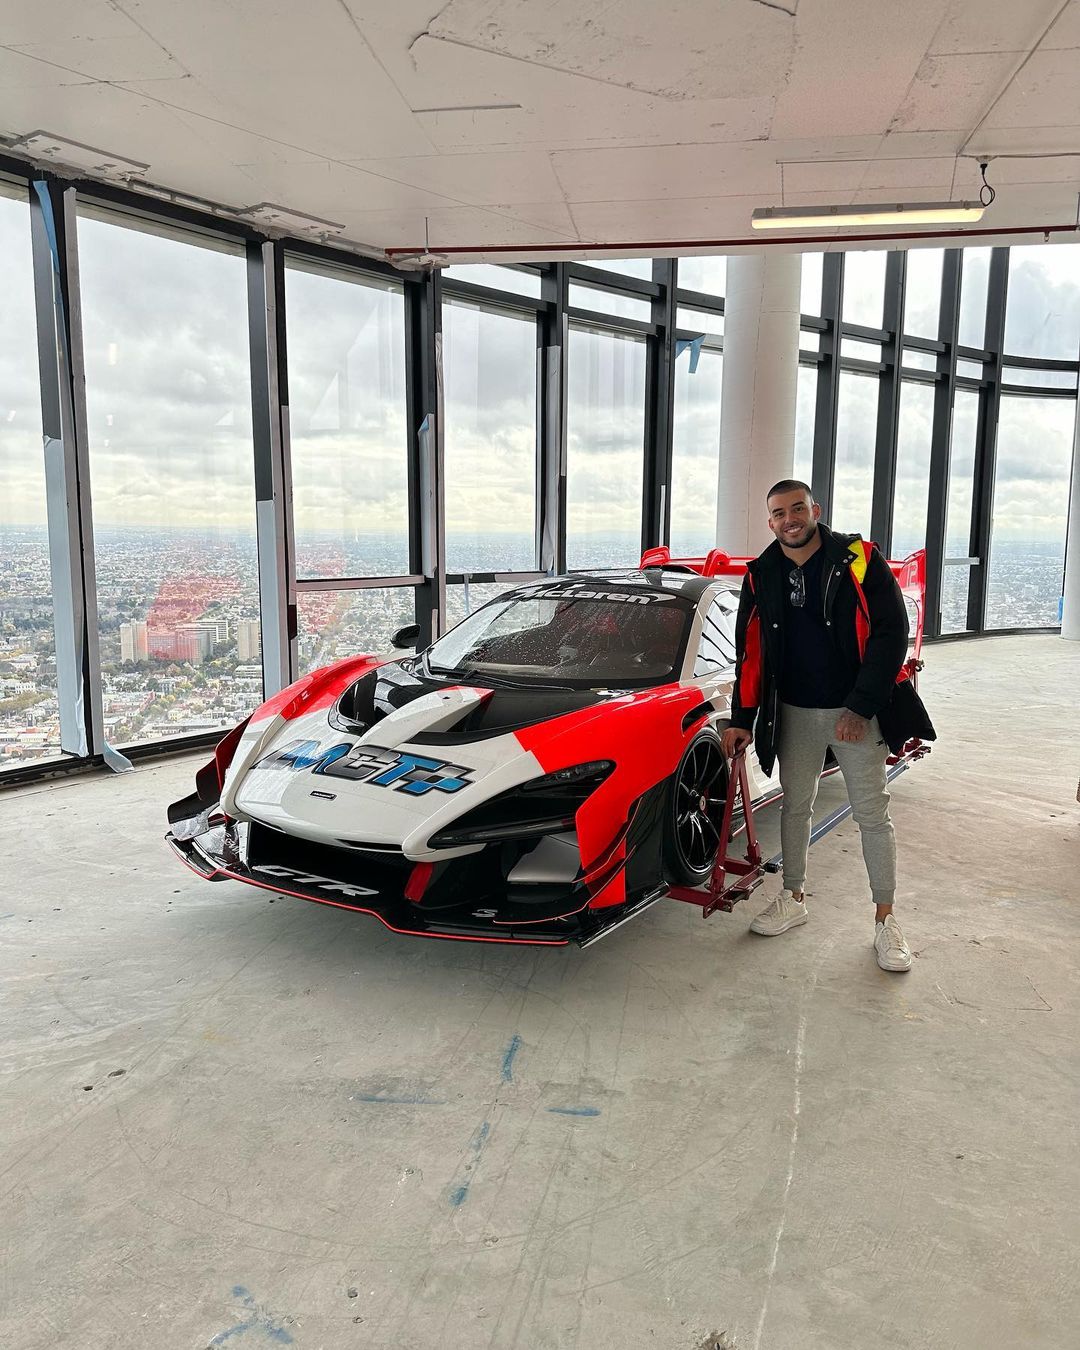 this is how the mclaren lifted by crane to a 57 floor penthouse looks in the living room 3